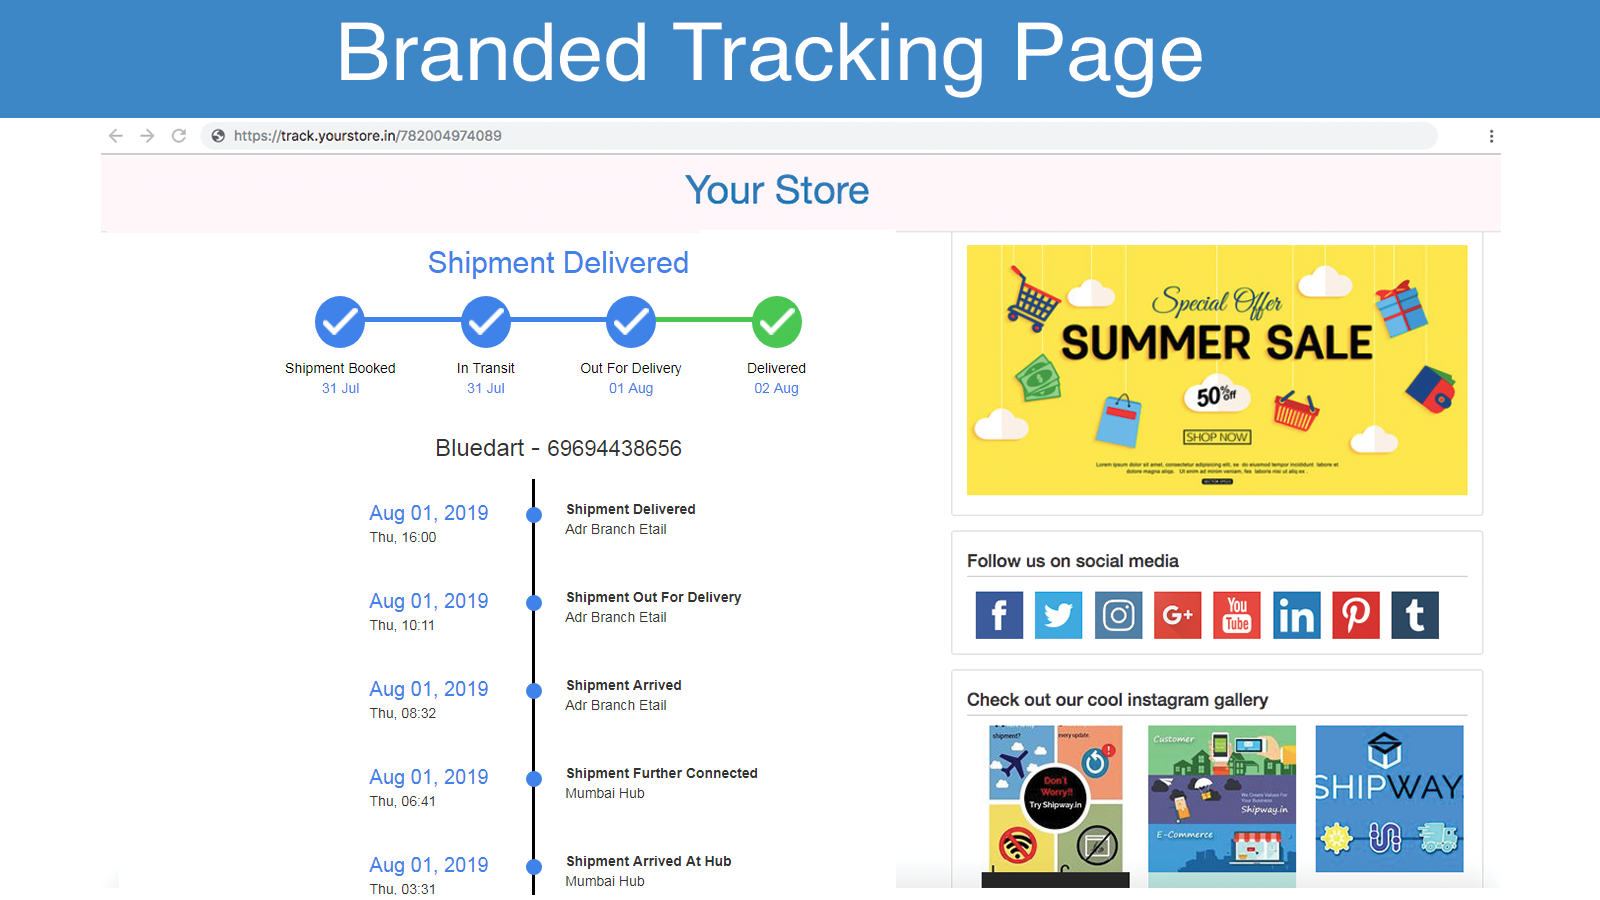 Branded tracking pages